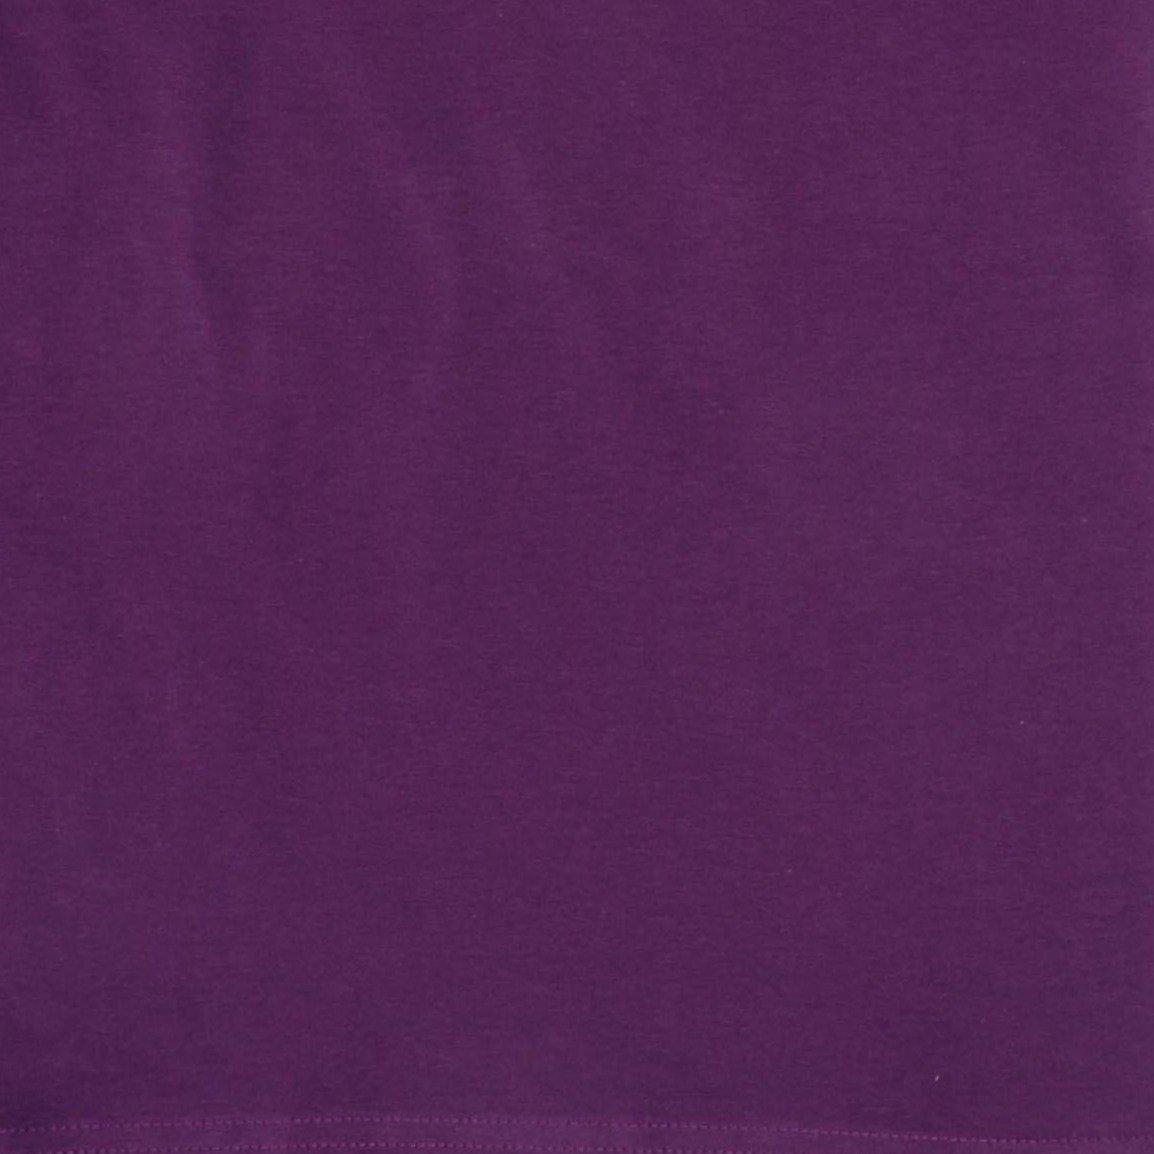 More than a Fling - Dark Purple Womens Short Sleeved Top (X-Large)